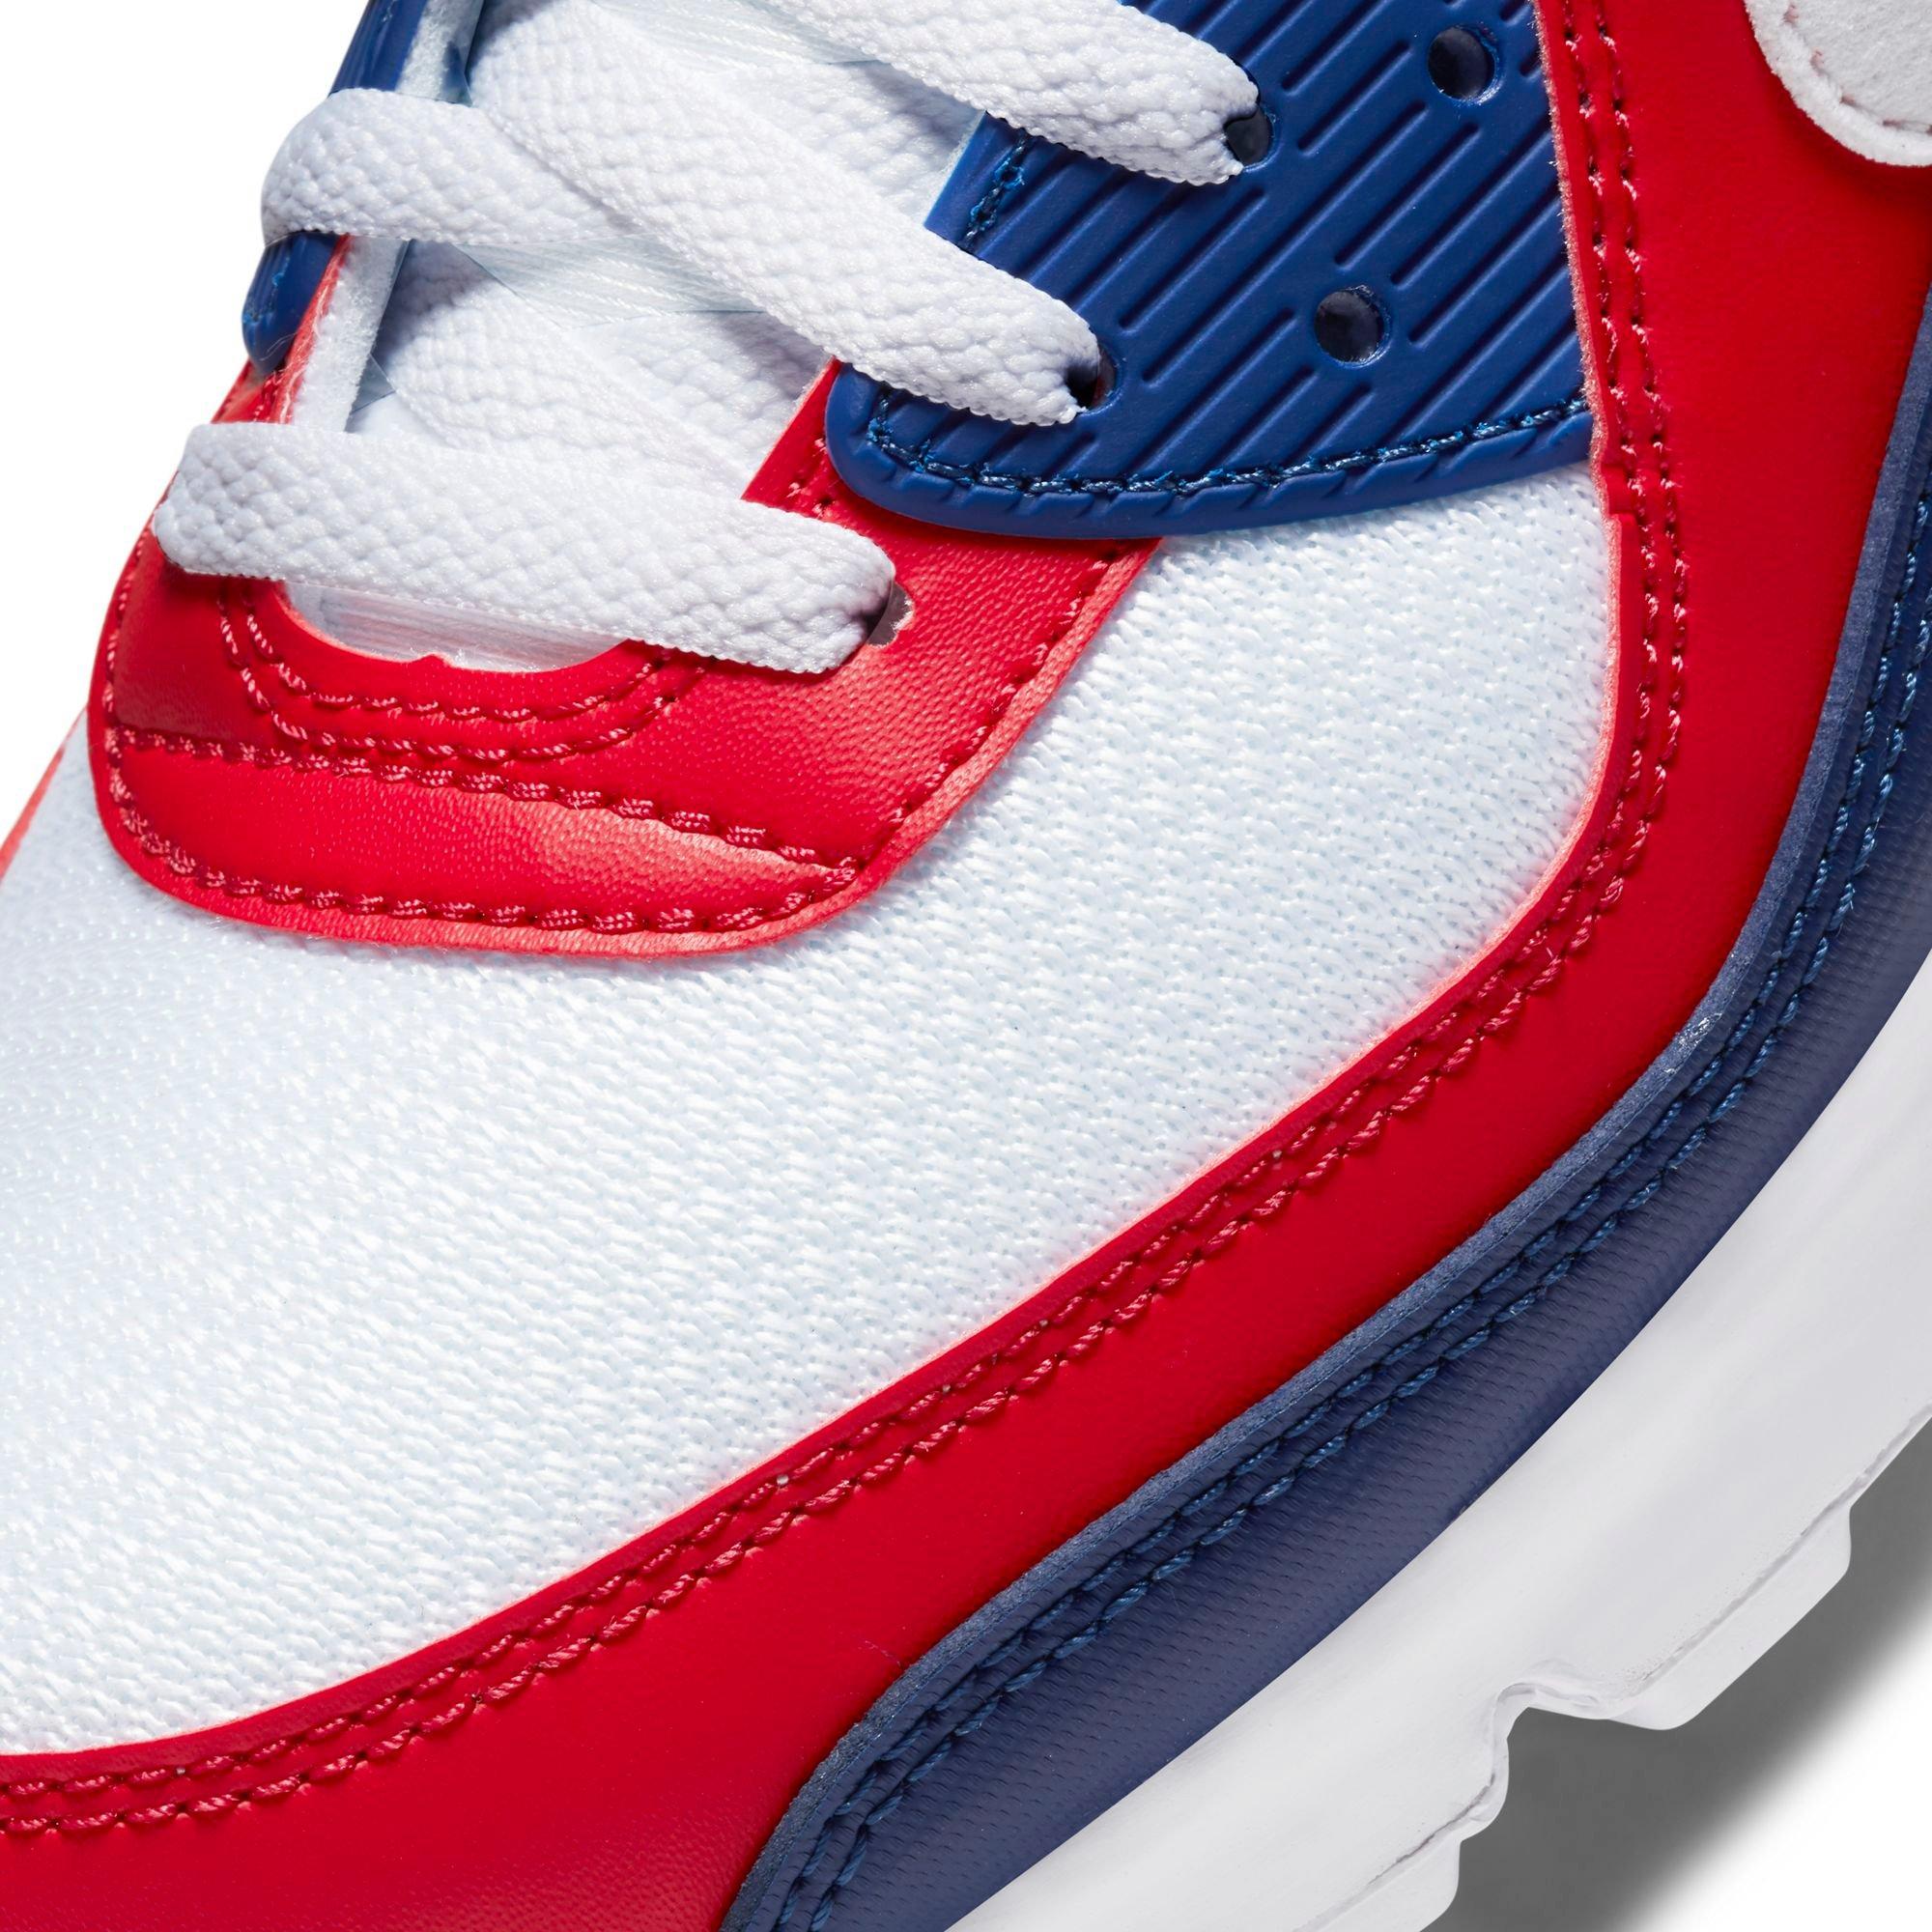 red white and blue 90 air max